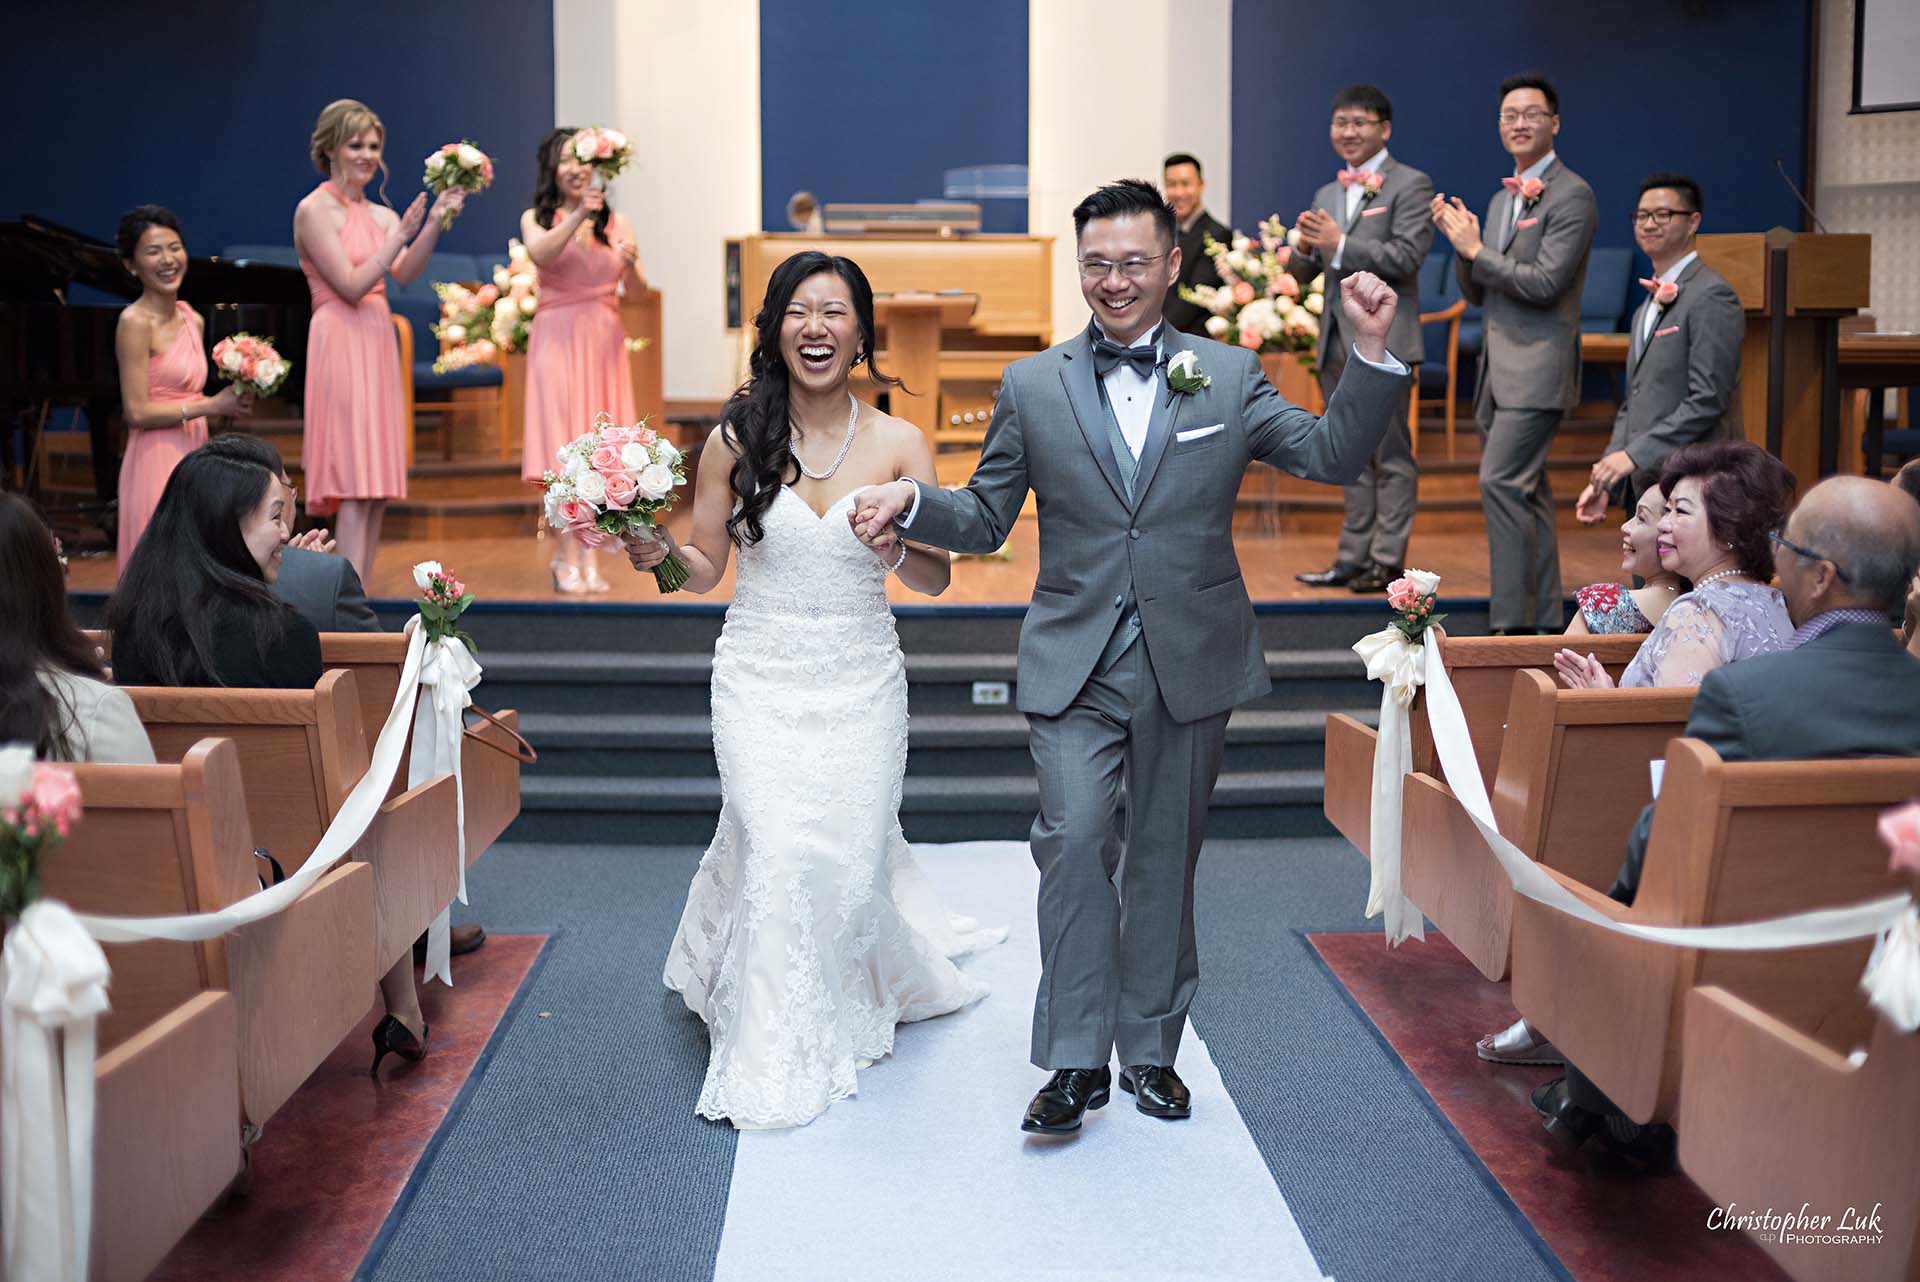 Christopher Luk Toronto Wedding Photographer Trinity York Mills Church Ceremony Sanctuary Candid Natural Photojournalistic Bride Groom Celebrate Celebration Recessional Walking Down the Aisle Together 